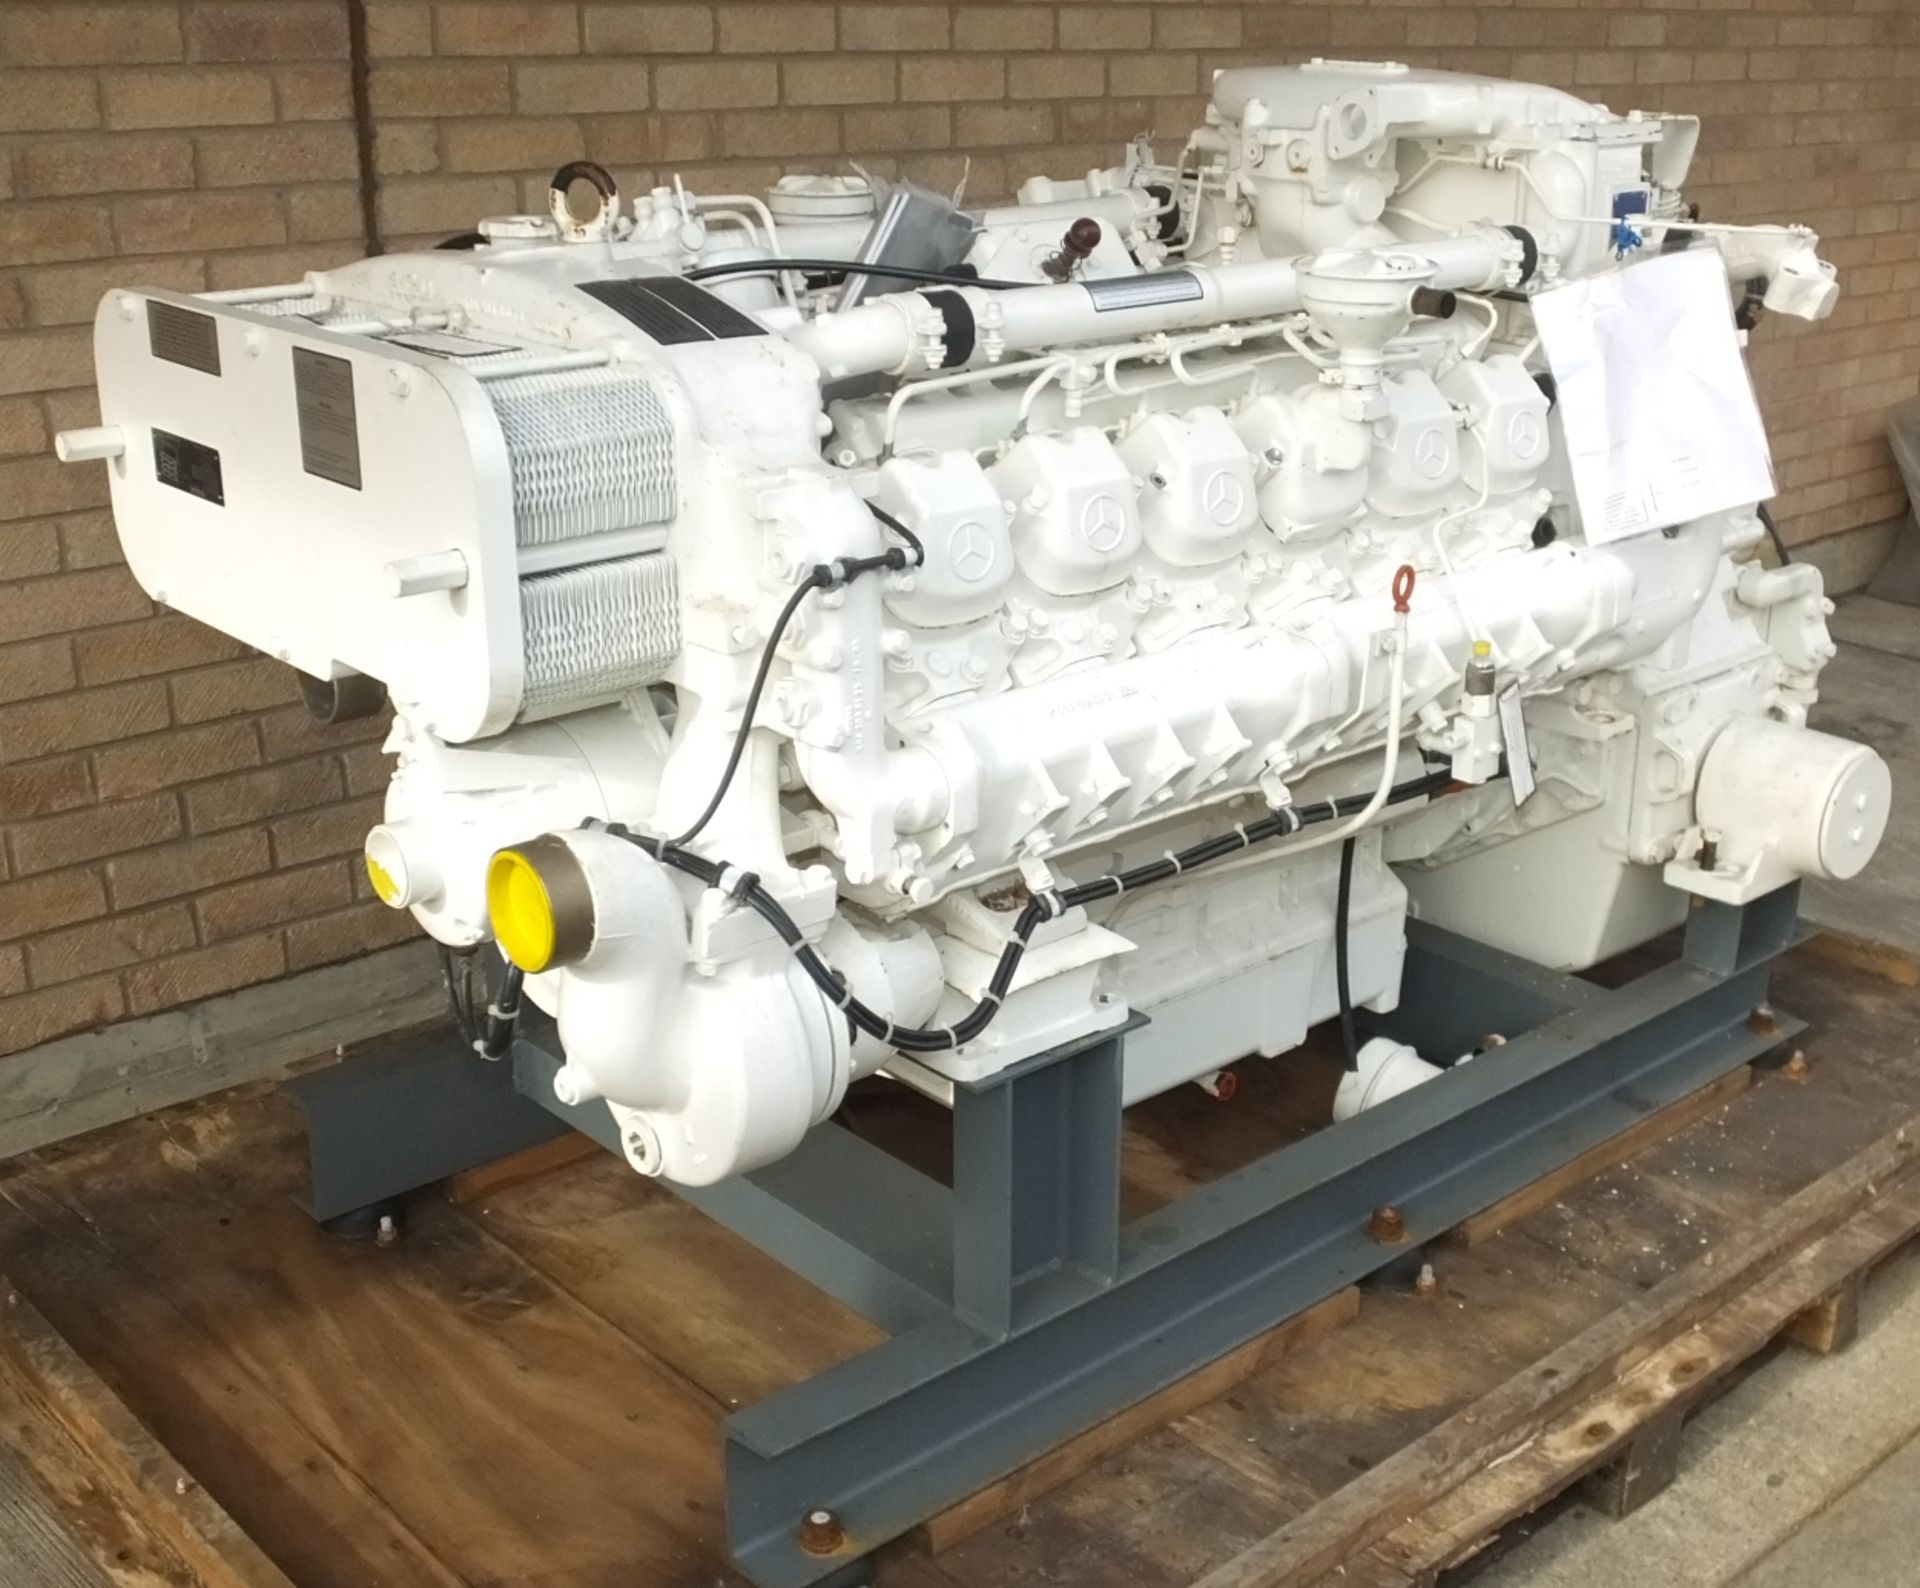 MTU 12V 183 engine - 610kW - 1310HP - 2100 RPM - looks to have only done test hours - very clean - Image 21 of 37